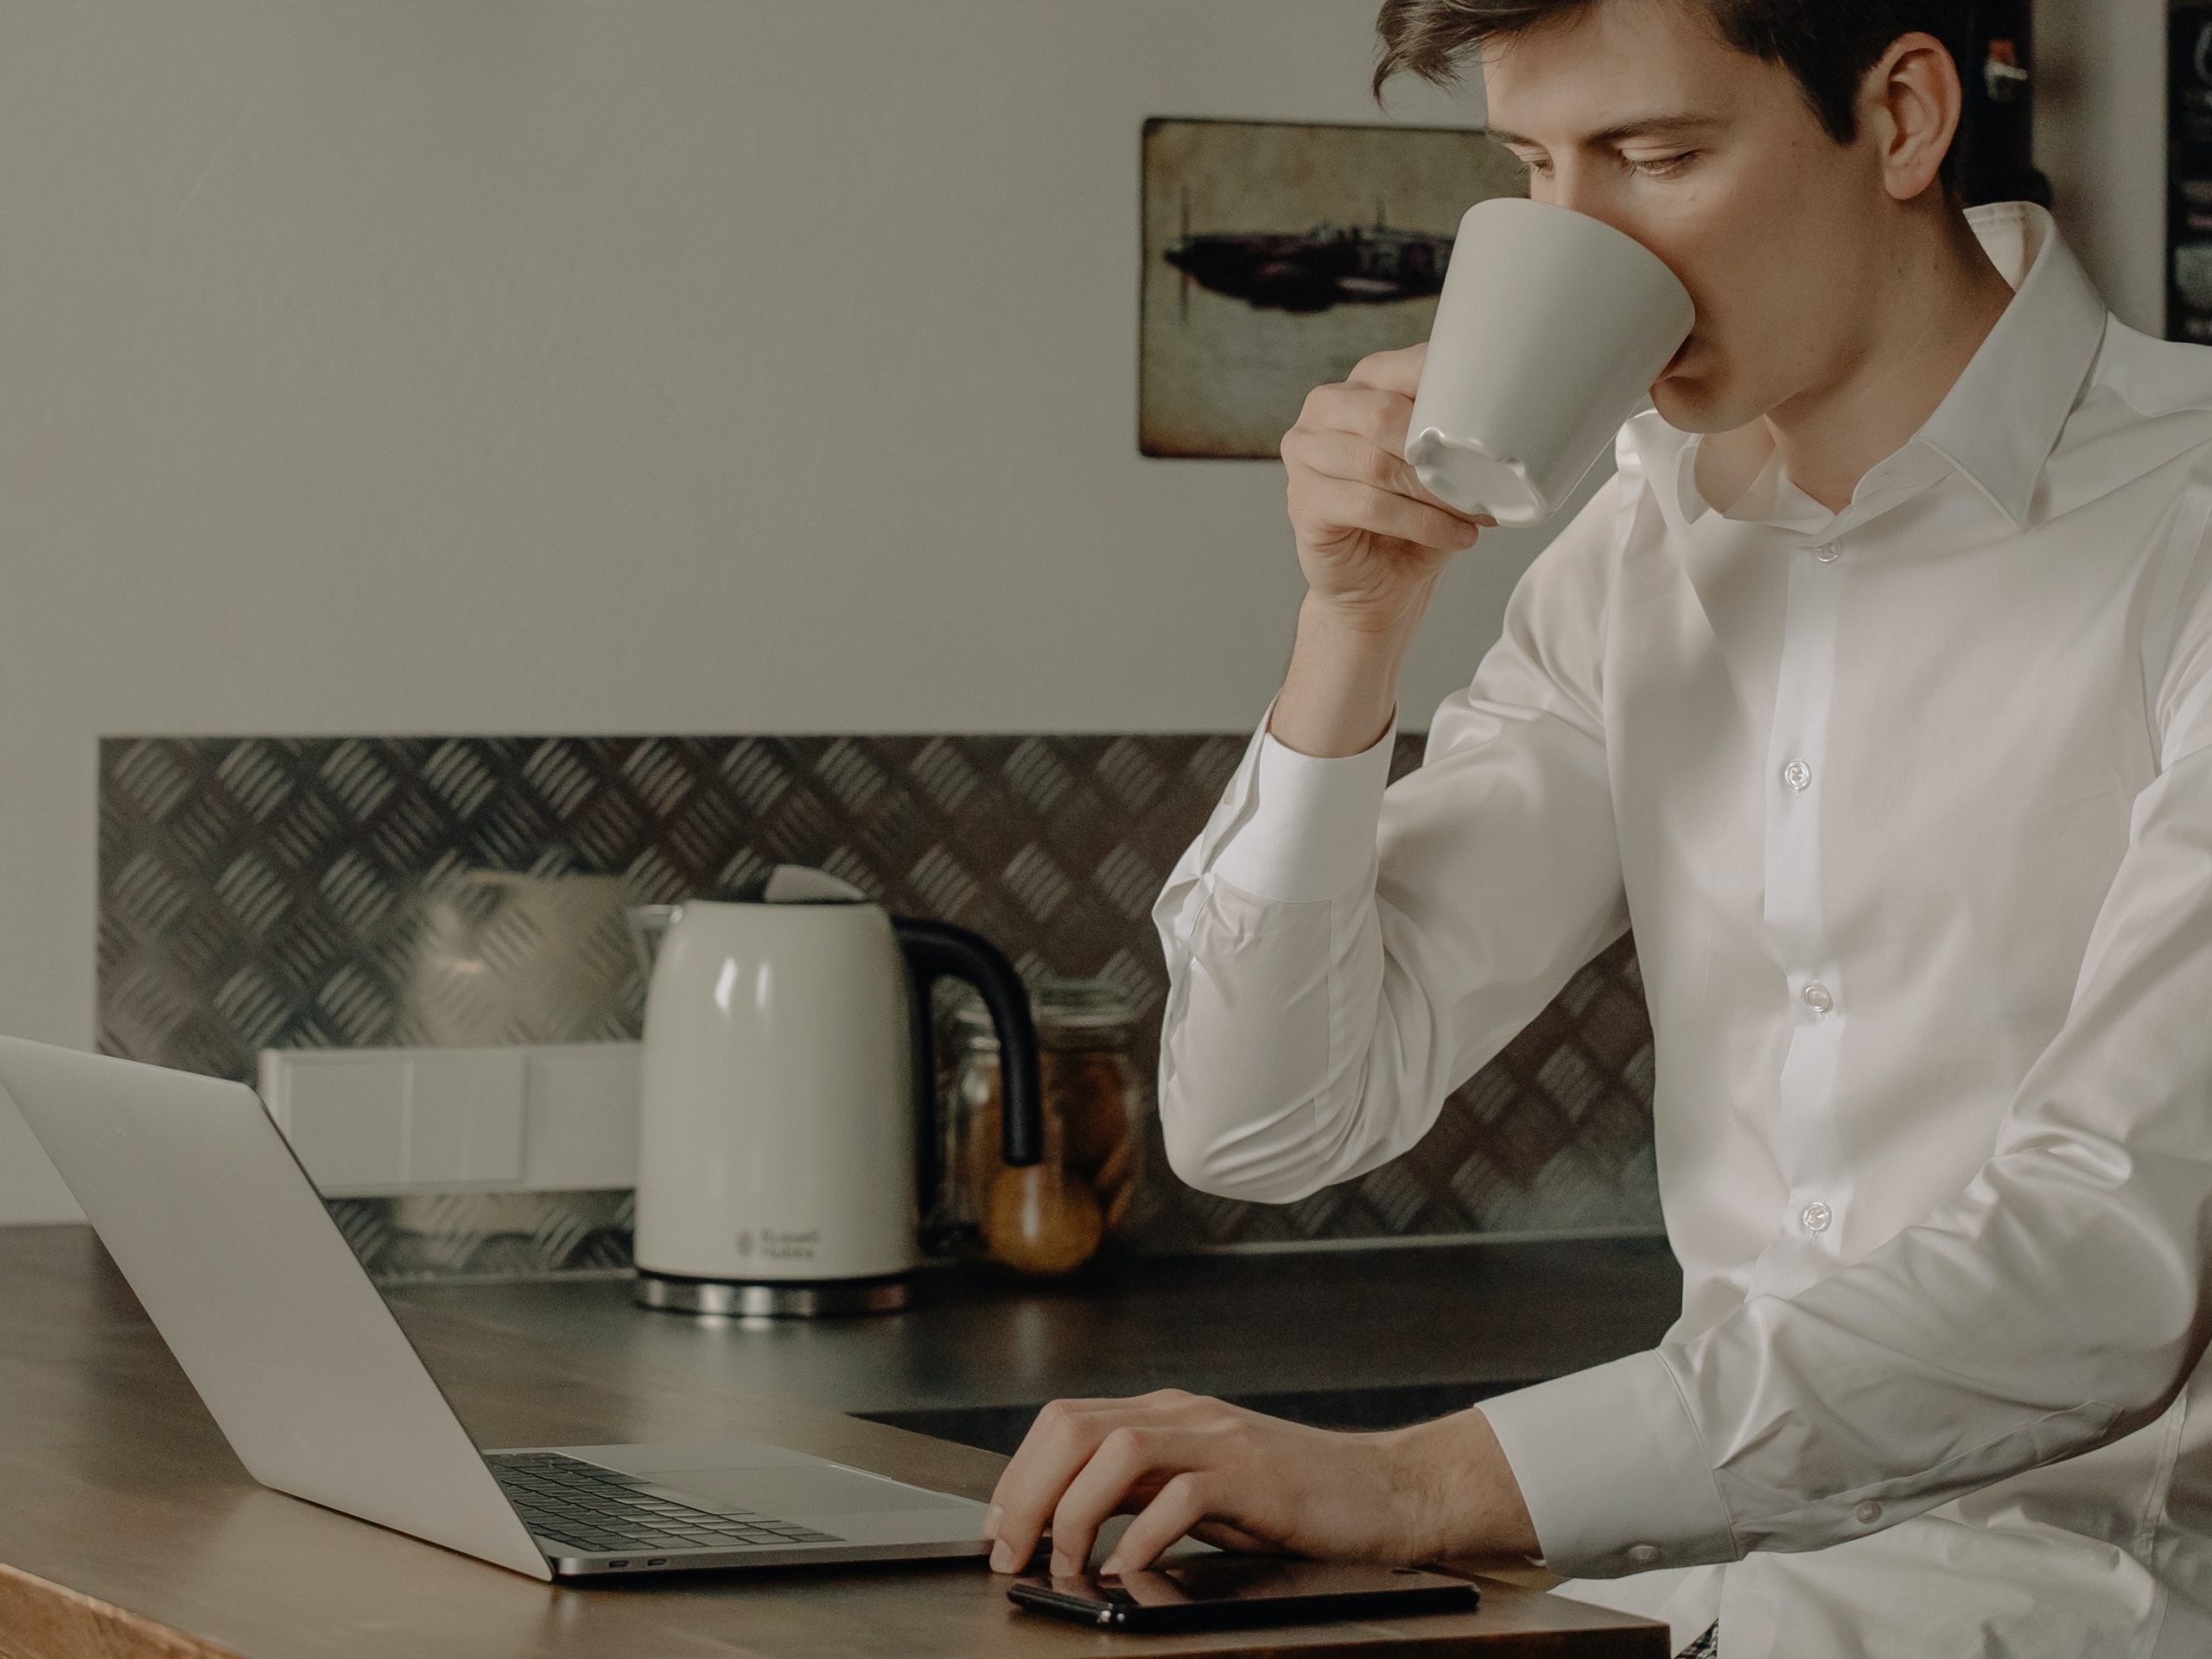 Person drinking something in front of the laptop in what does not appear to be a typical office to indicate work from home